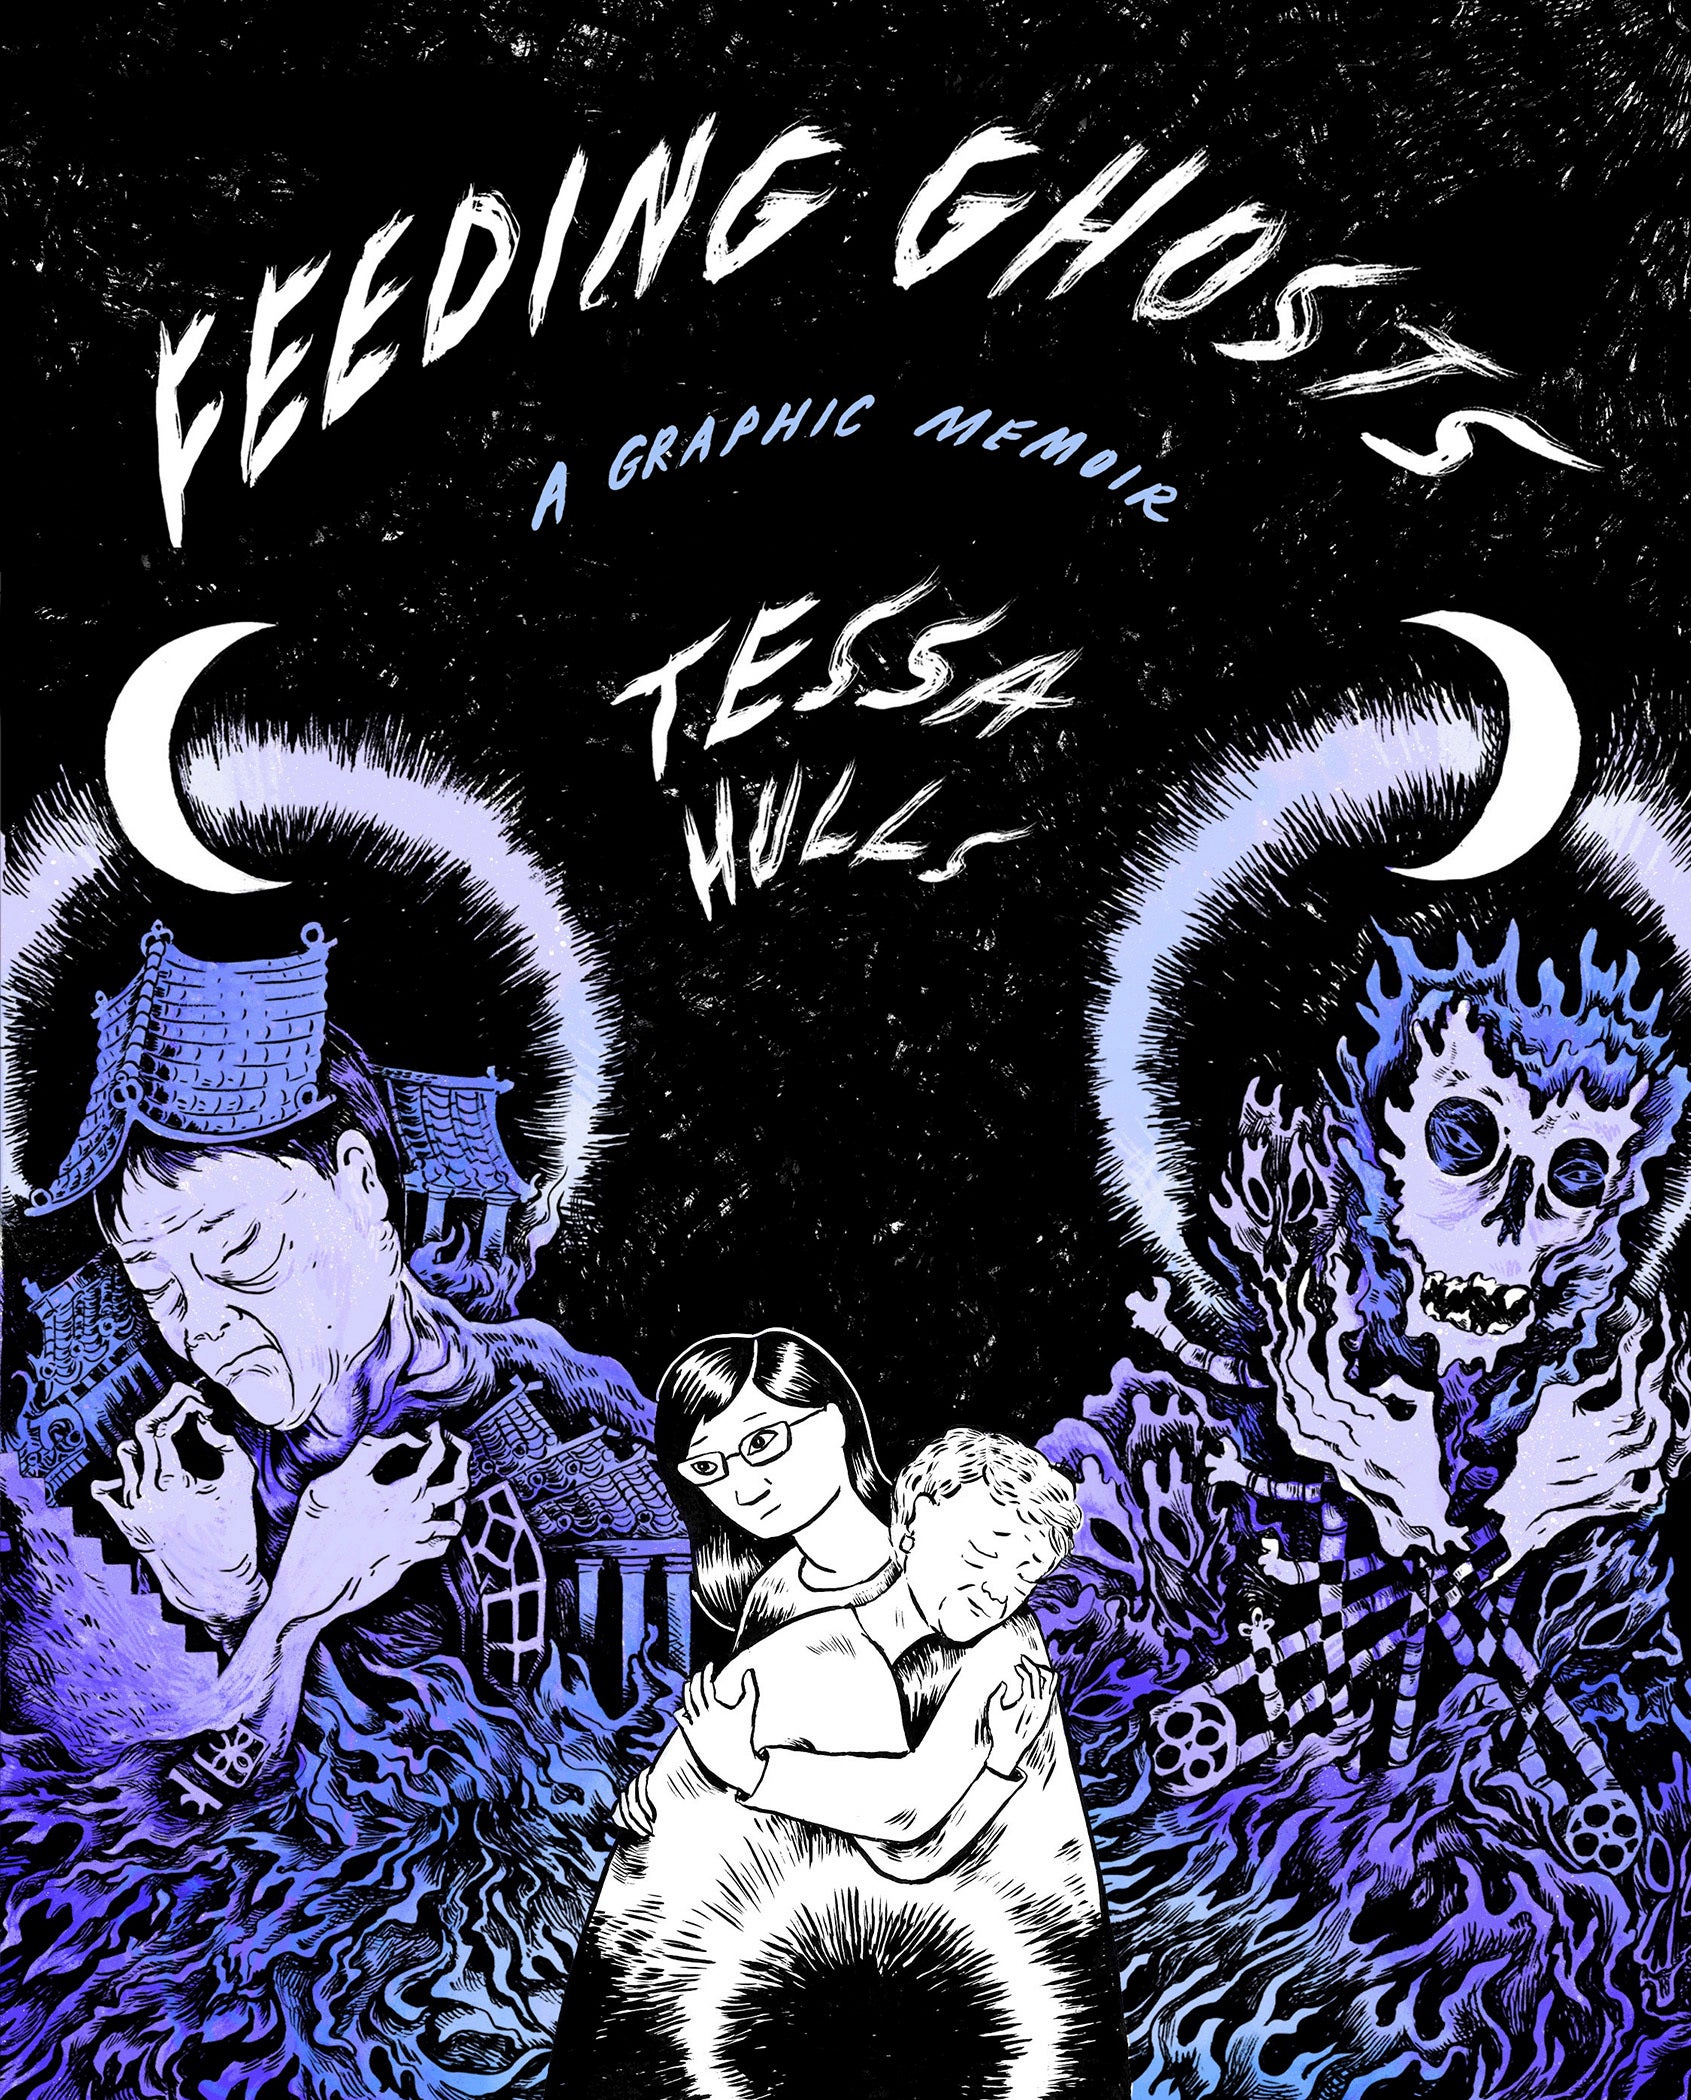 Book Review - Feeding Ghosts